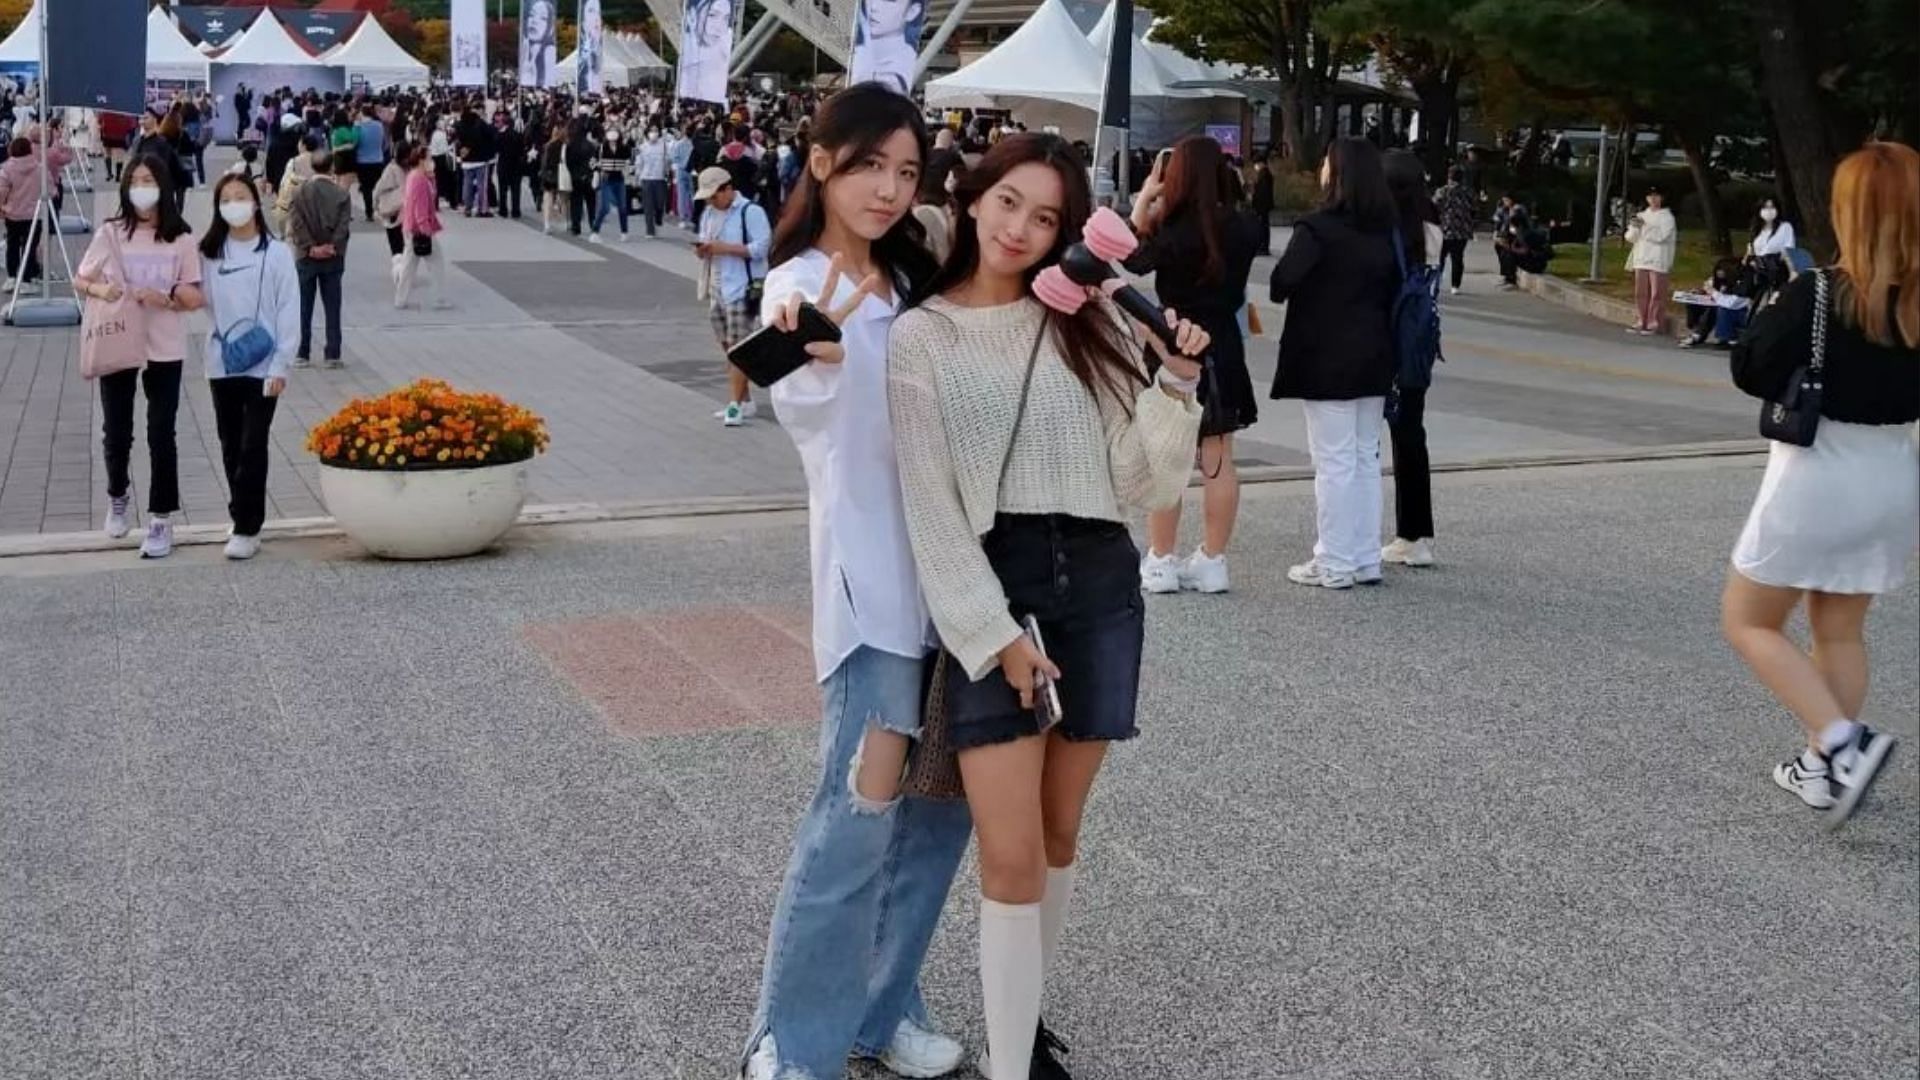 Actresses Kal So-won and Lee Re were spotted clicking pictures at KSPO dome where BLACKPINK&#039;s concert was being held (Image via Twitter/janydior)